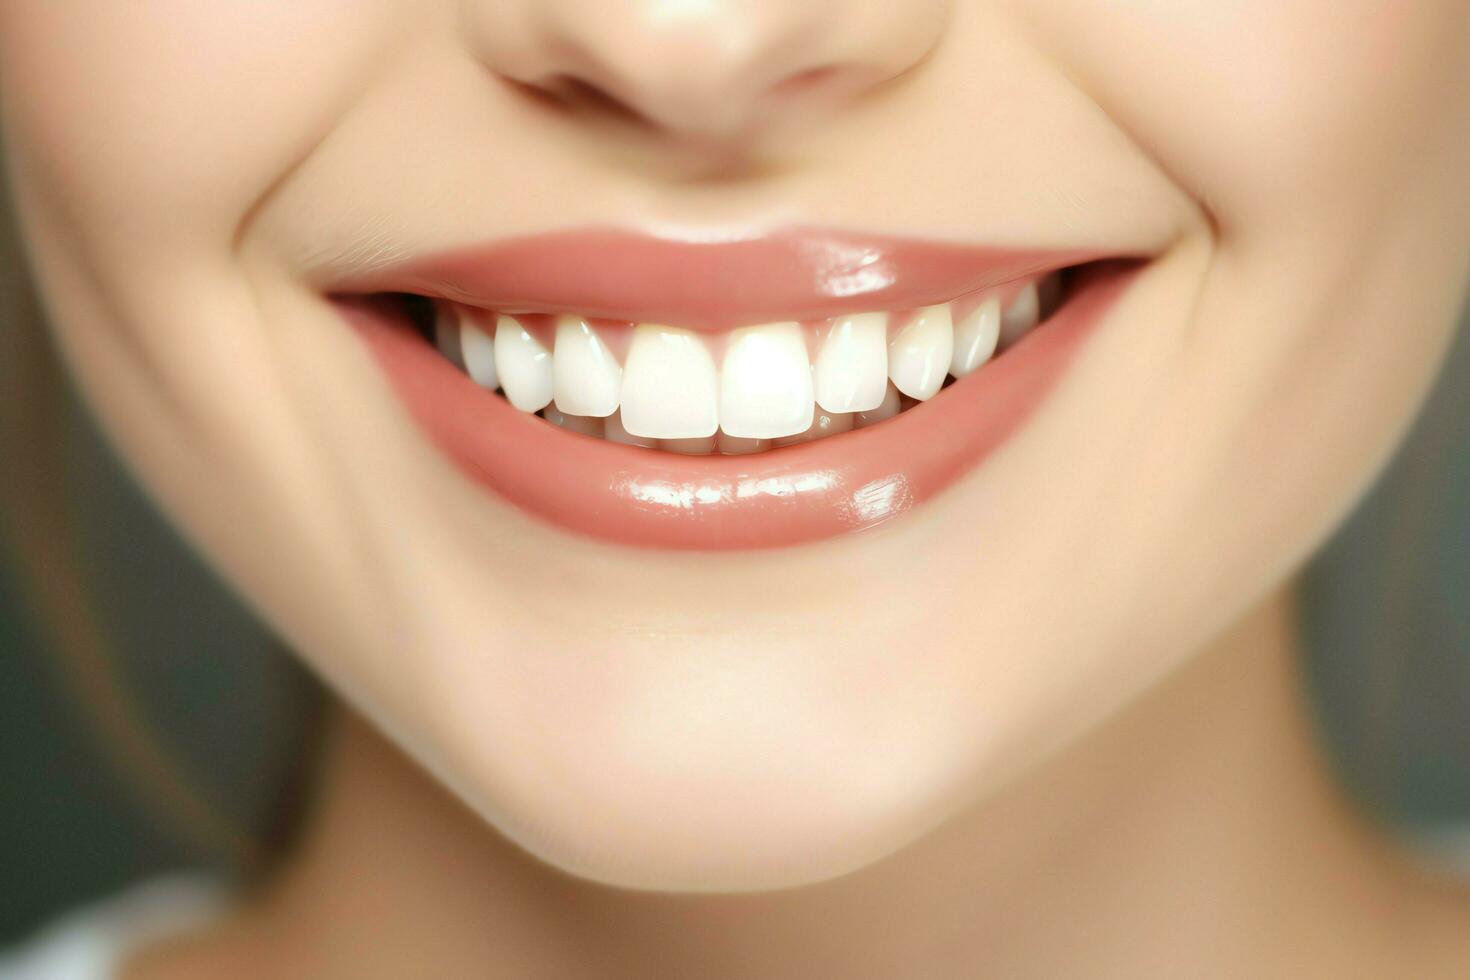 Perfect healthy teeth smile of a young woman at a dentist. Teeth whitening. Dental care, stomatology concept by AI Generated photo